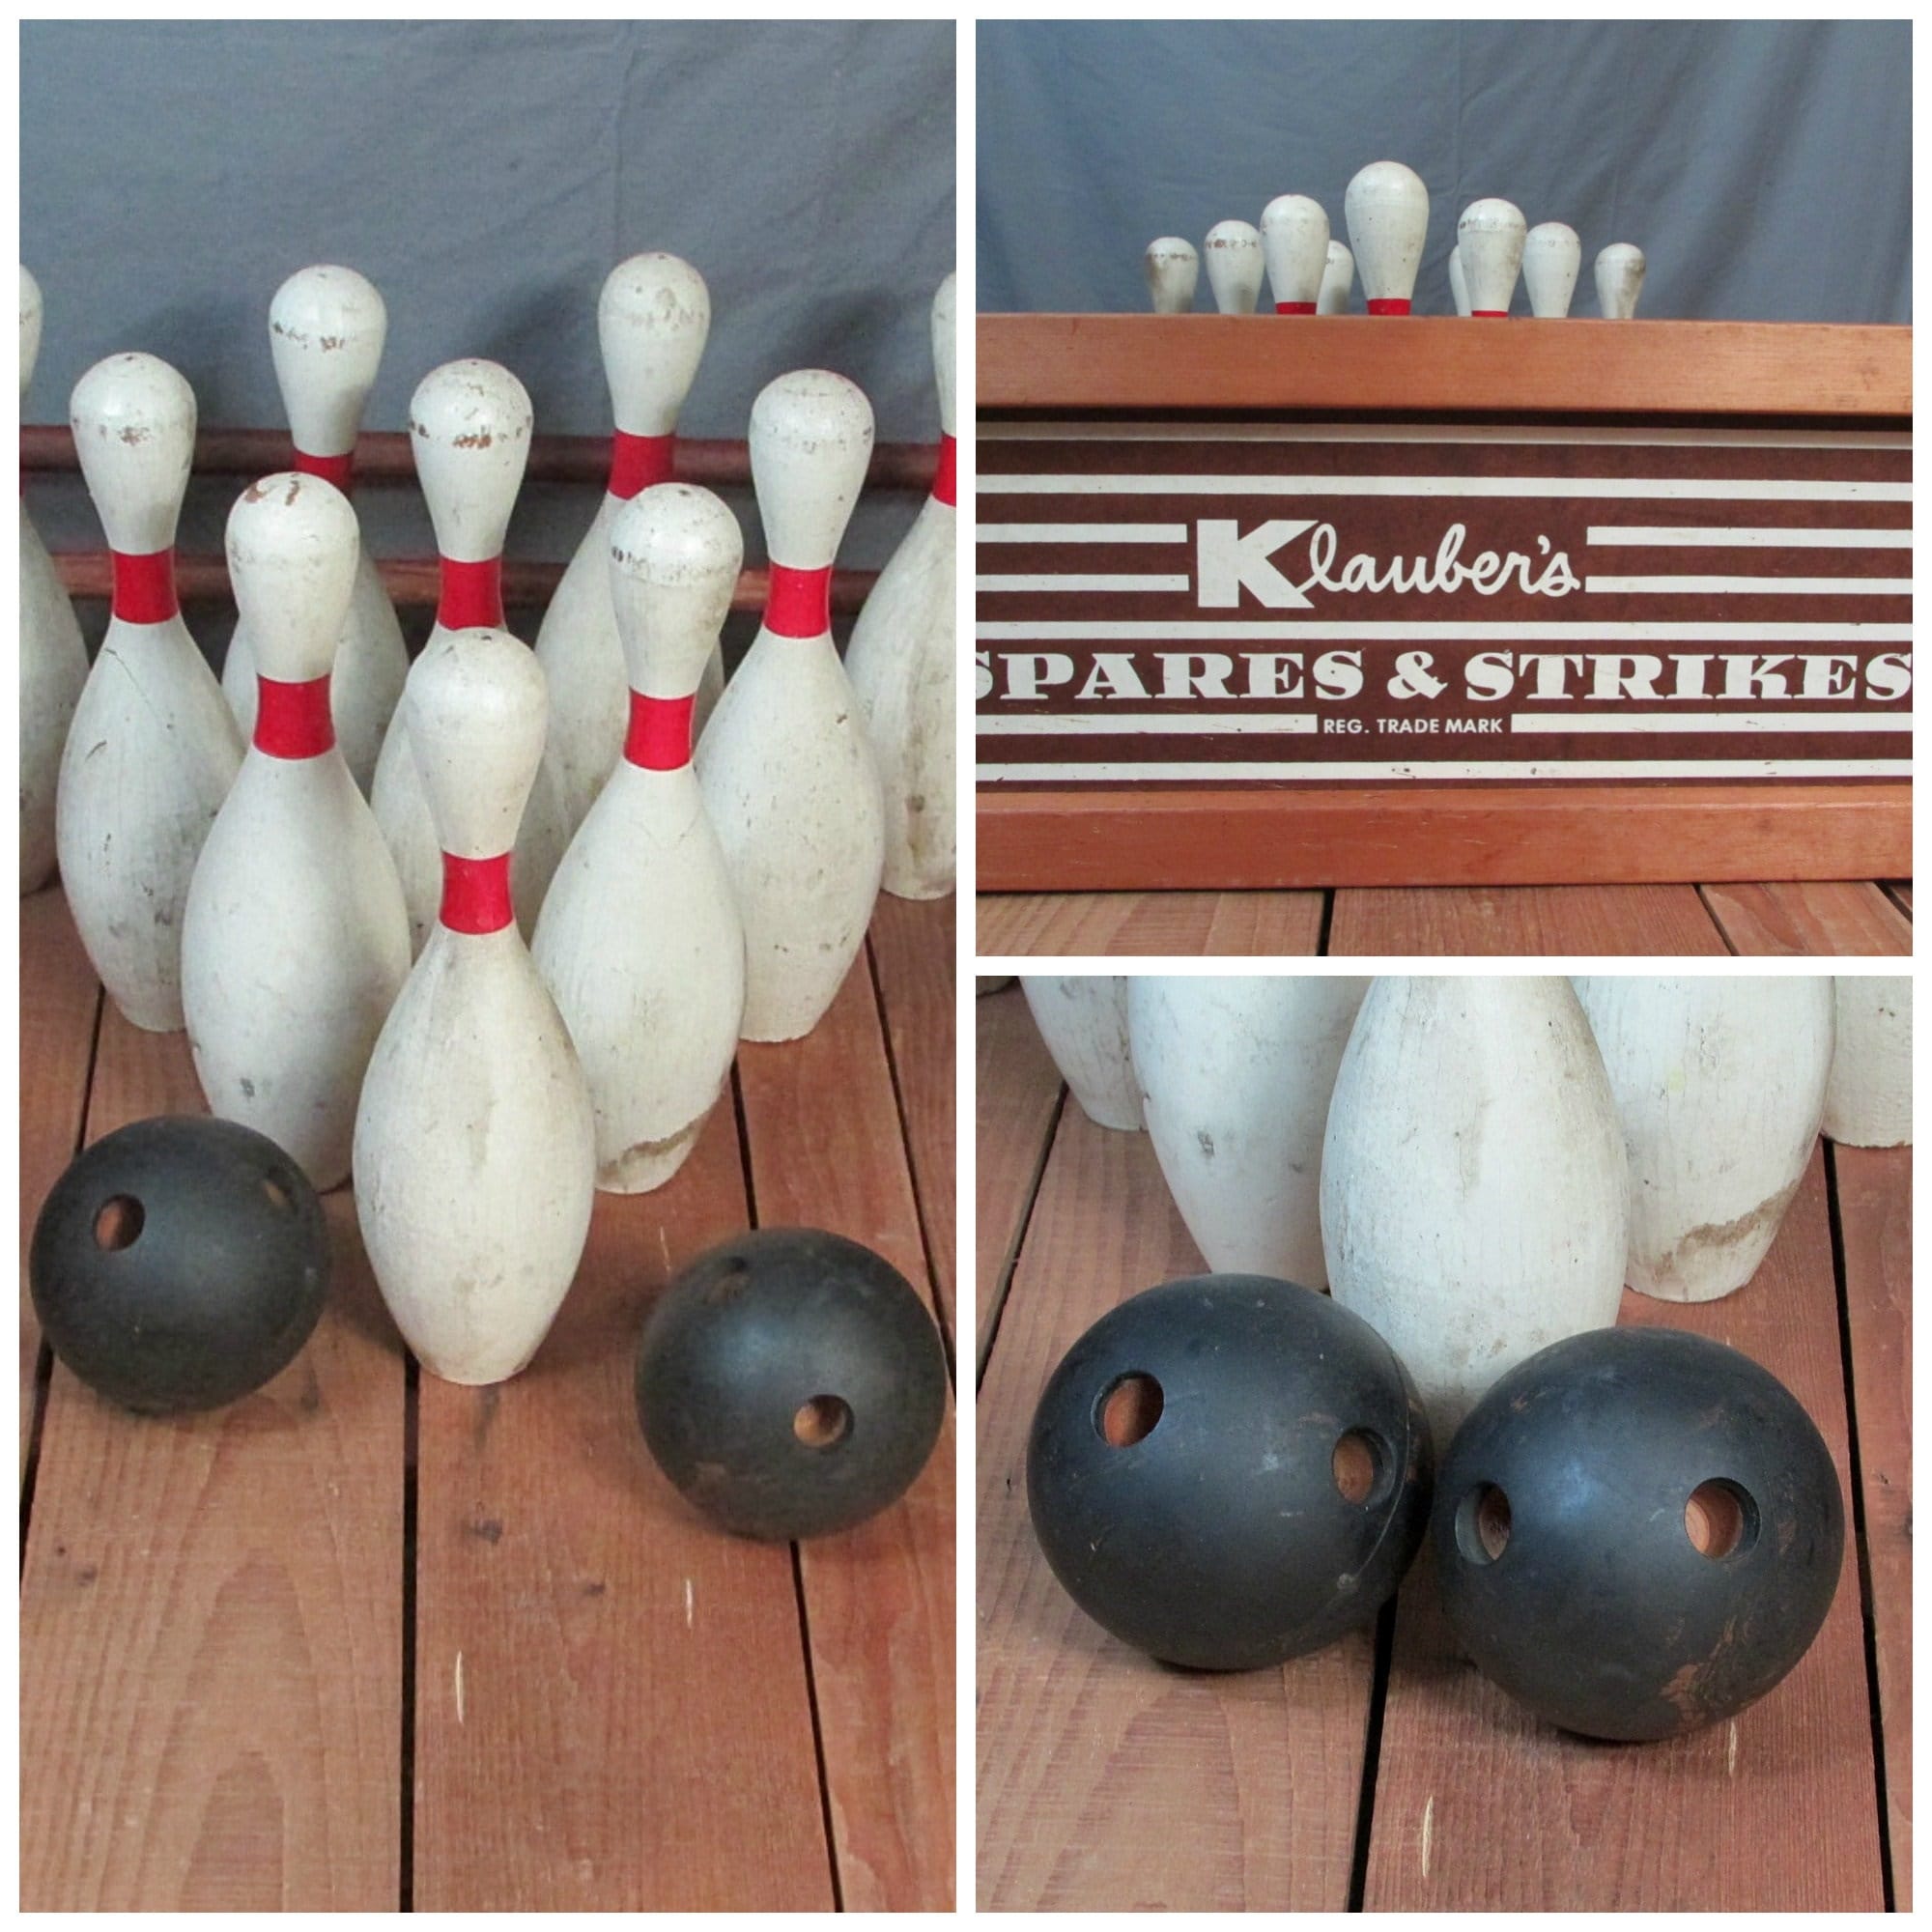 10 DUCK PINS 2 DUCK BOWLING BALLS VINTAGE REAL 1930'S